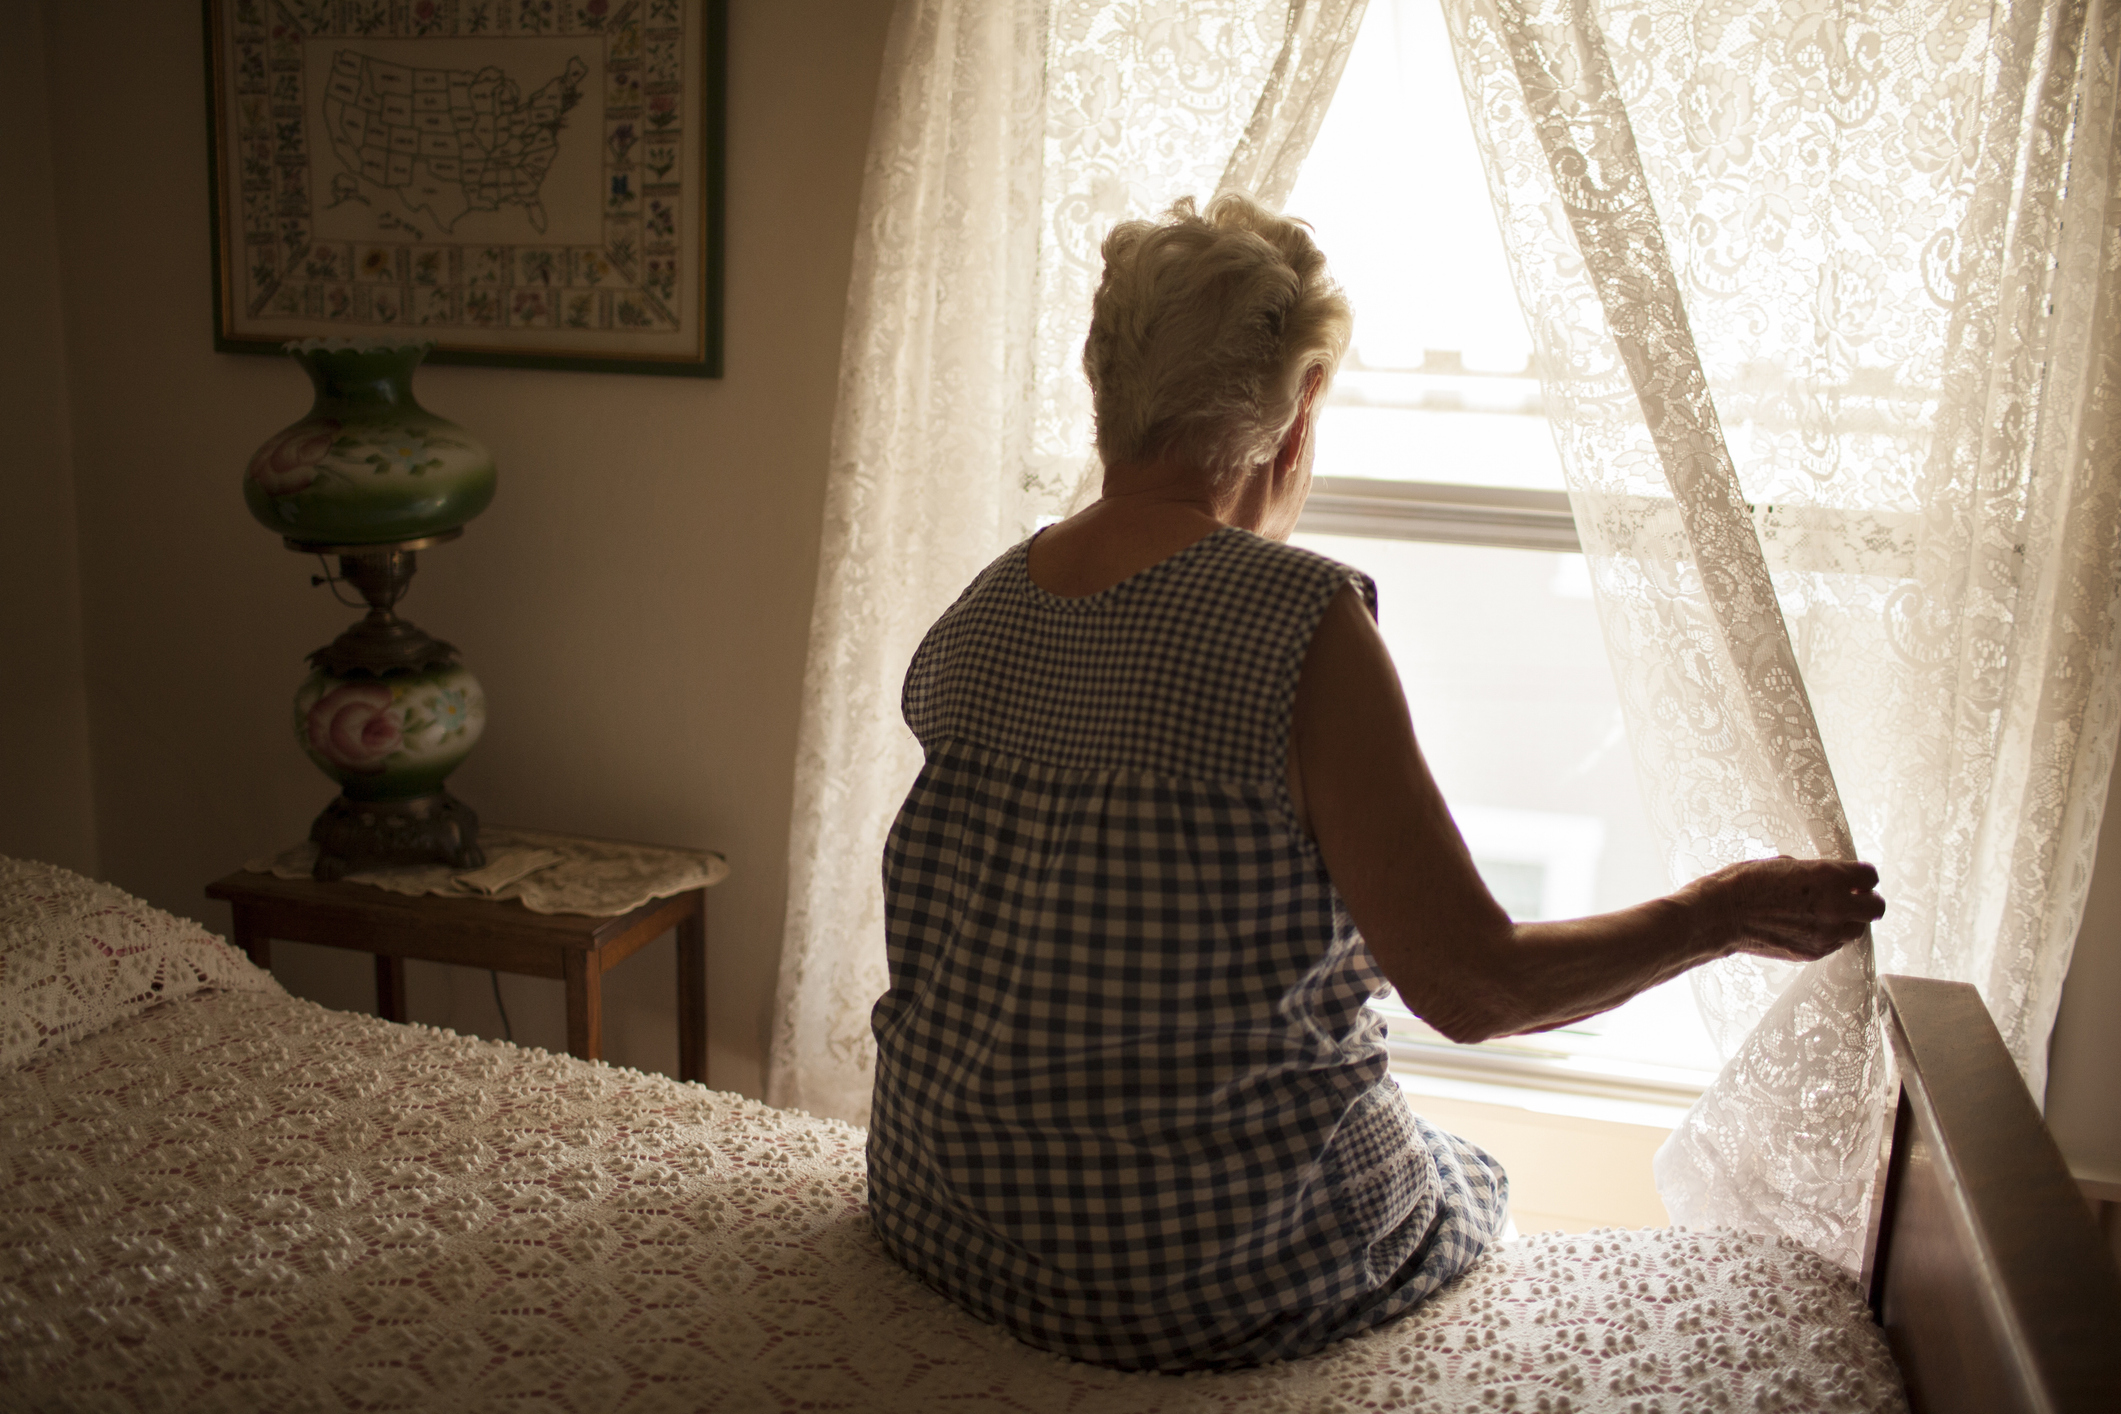 The Growing Epidemic of Elderly Abuse